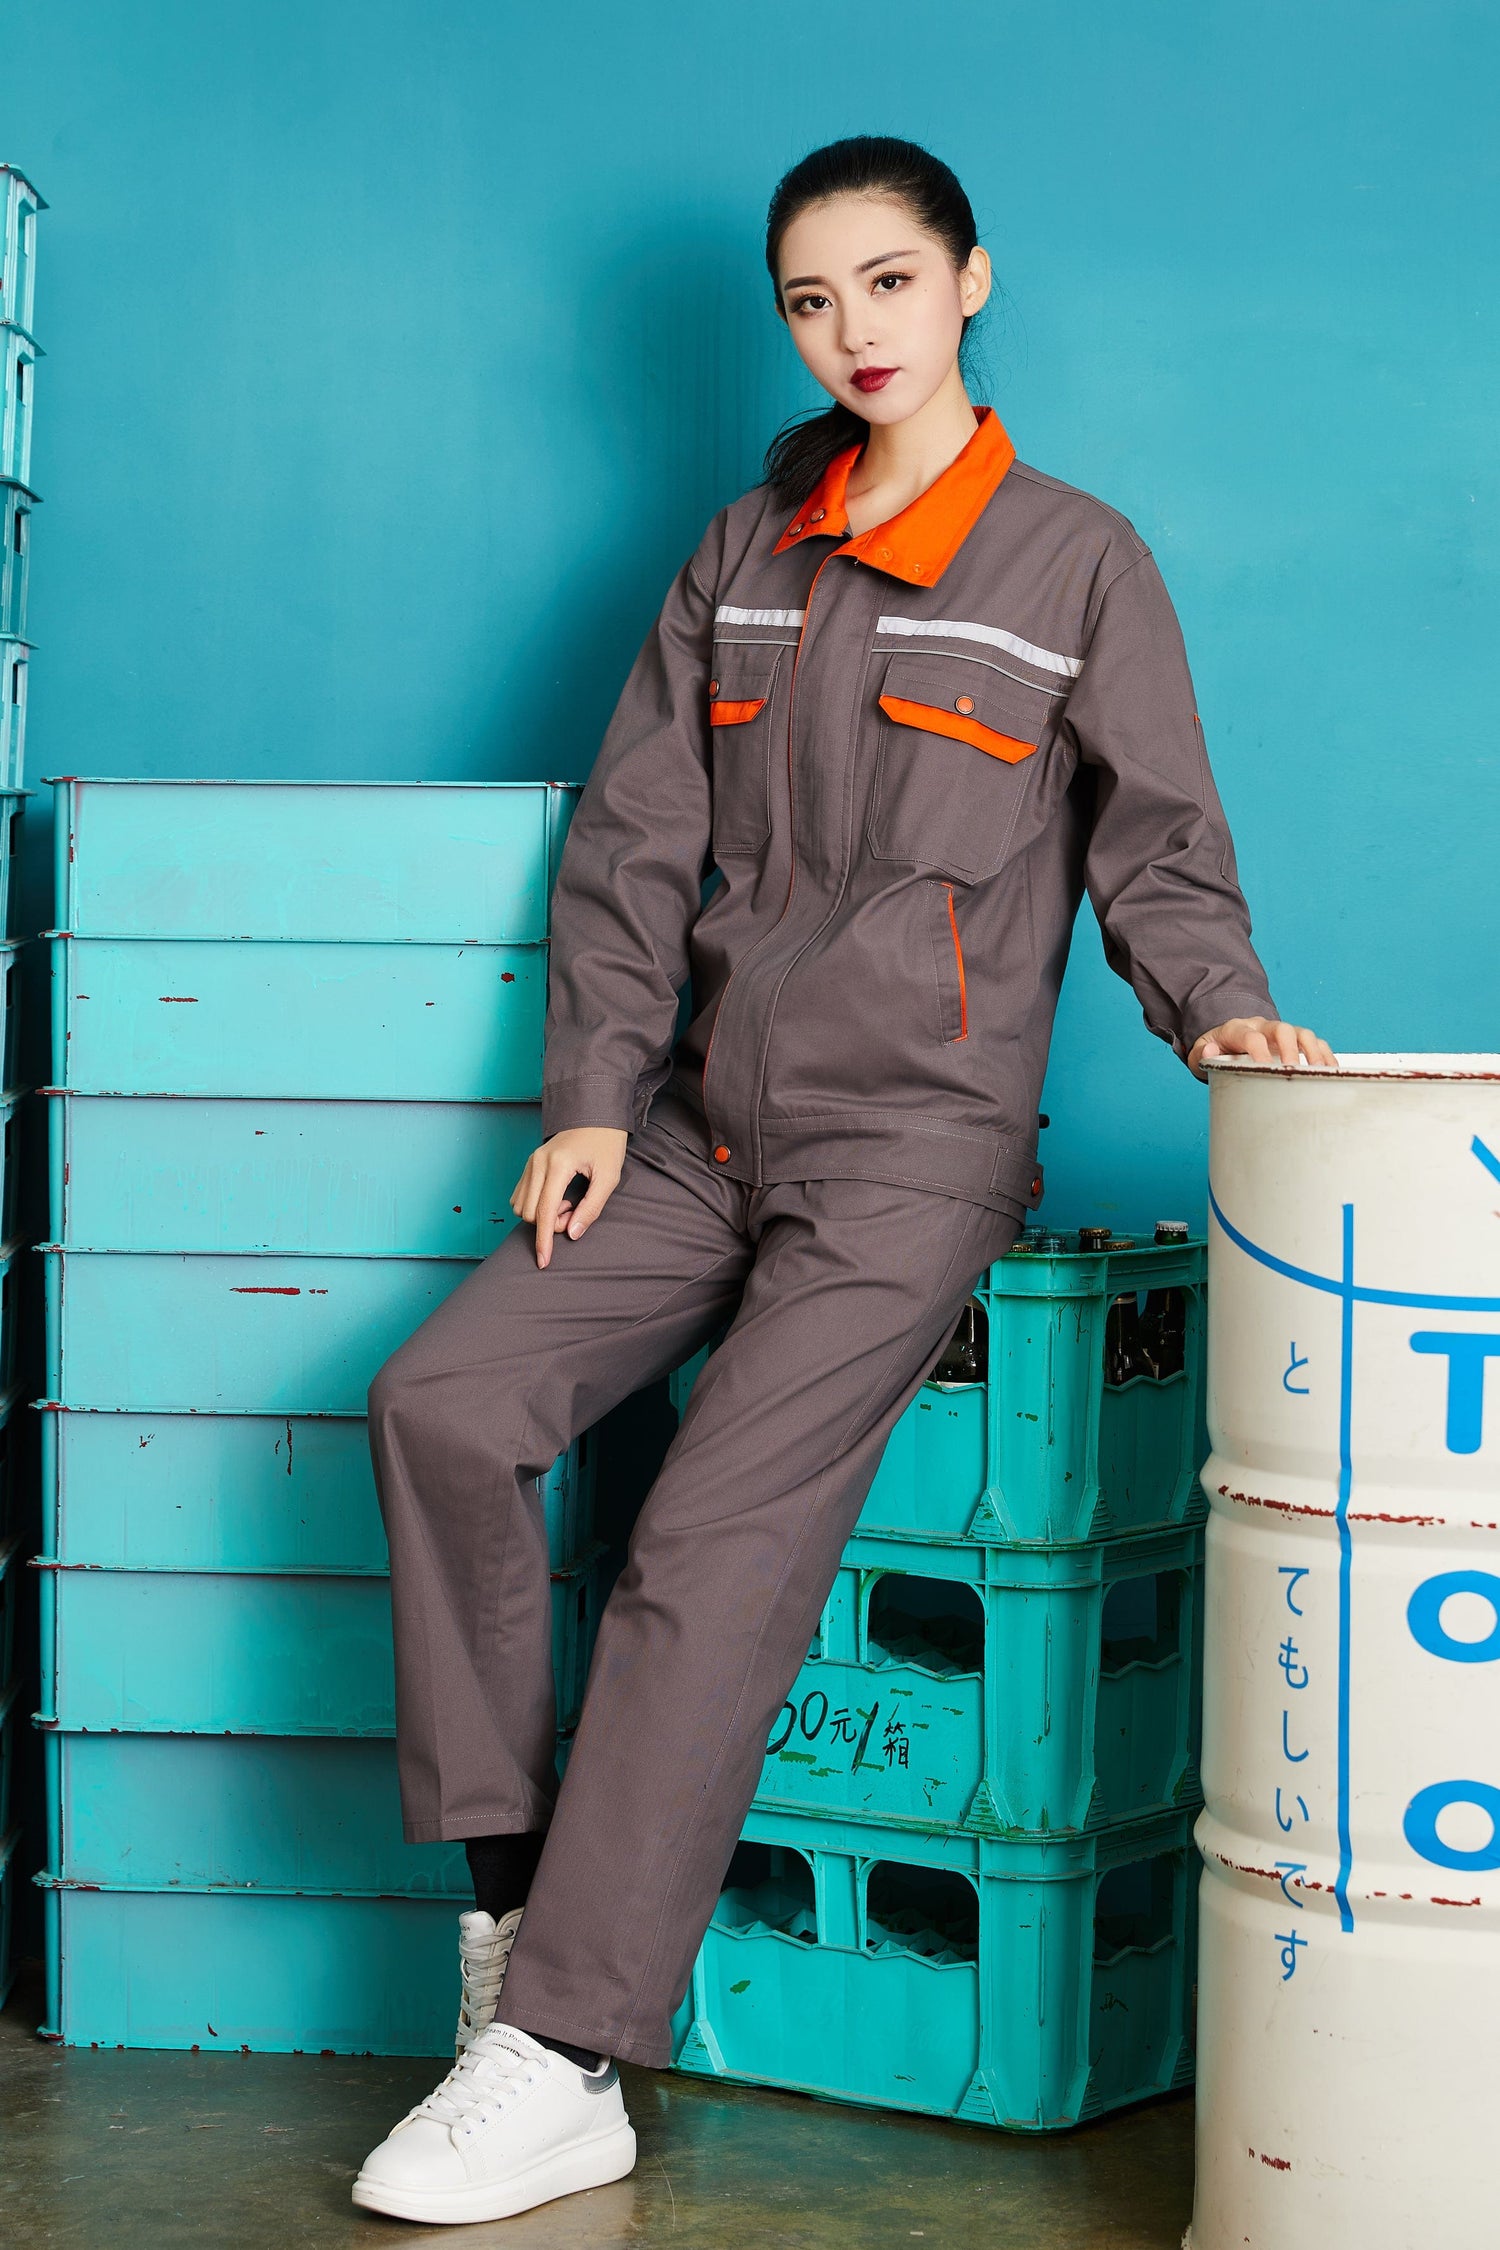 Corals Trading Co. 可樂思百貨商行 纯棉 Autumn and winter long-sleeved pure cotton series workwear SD-PC-W1505